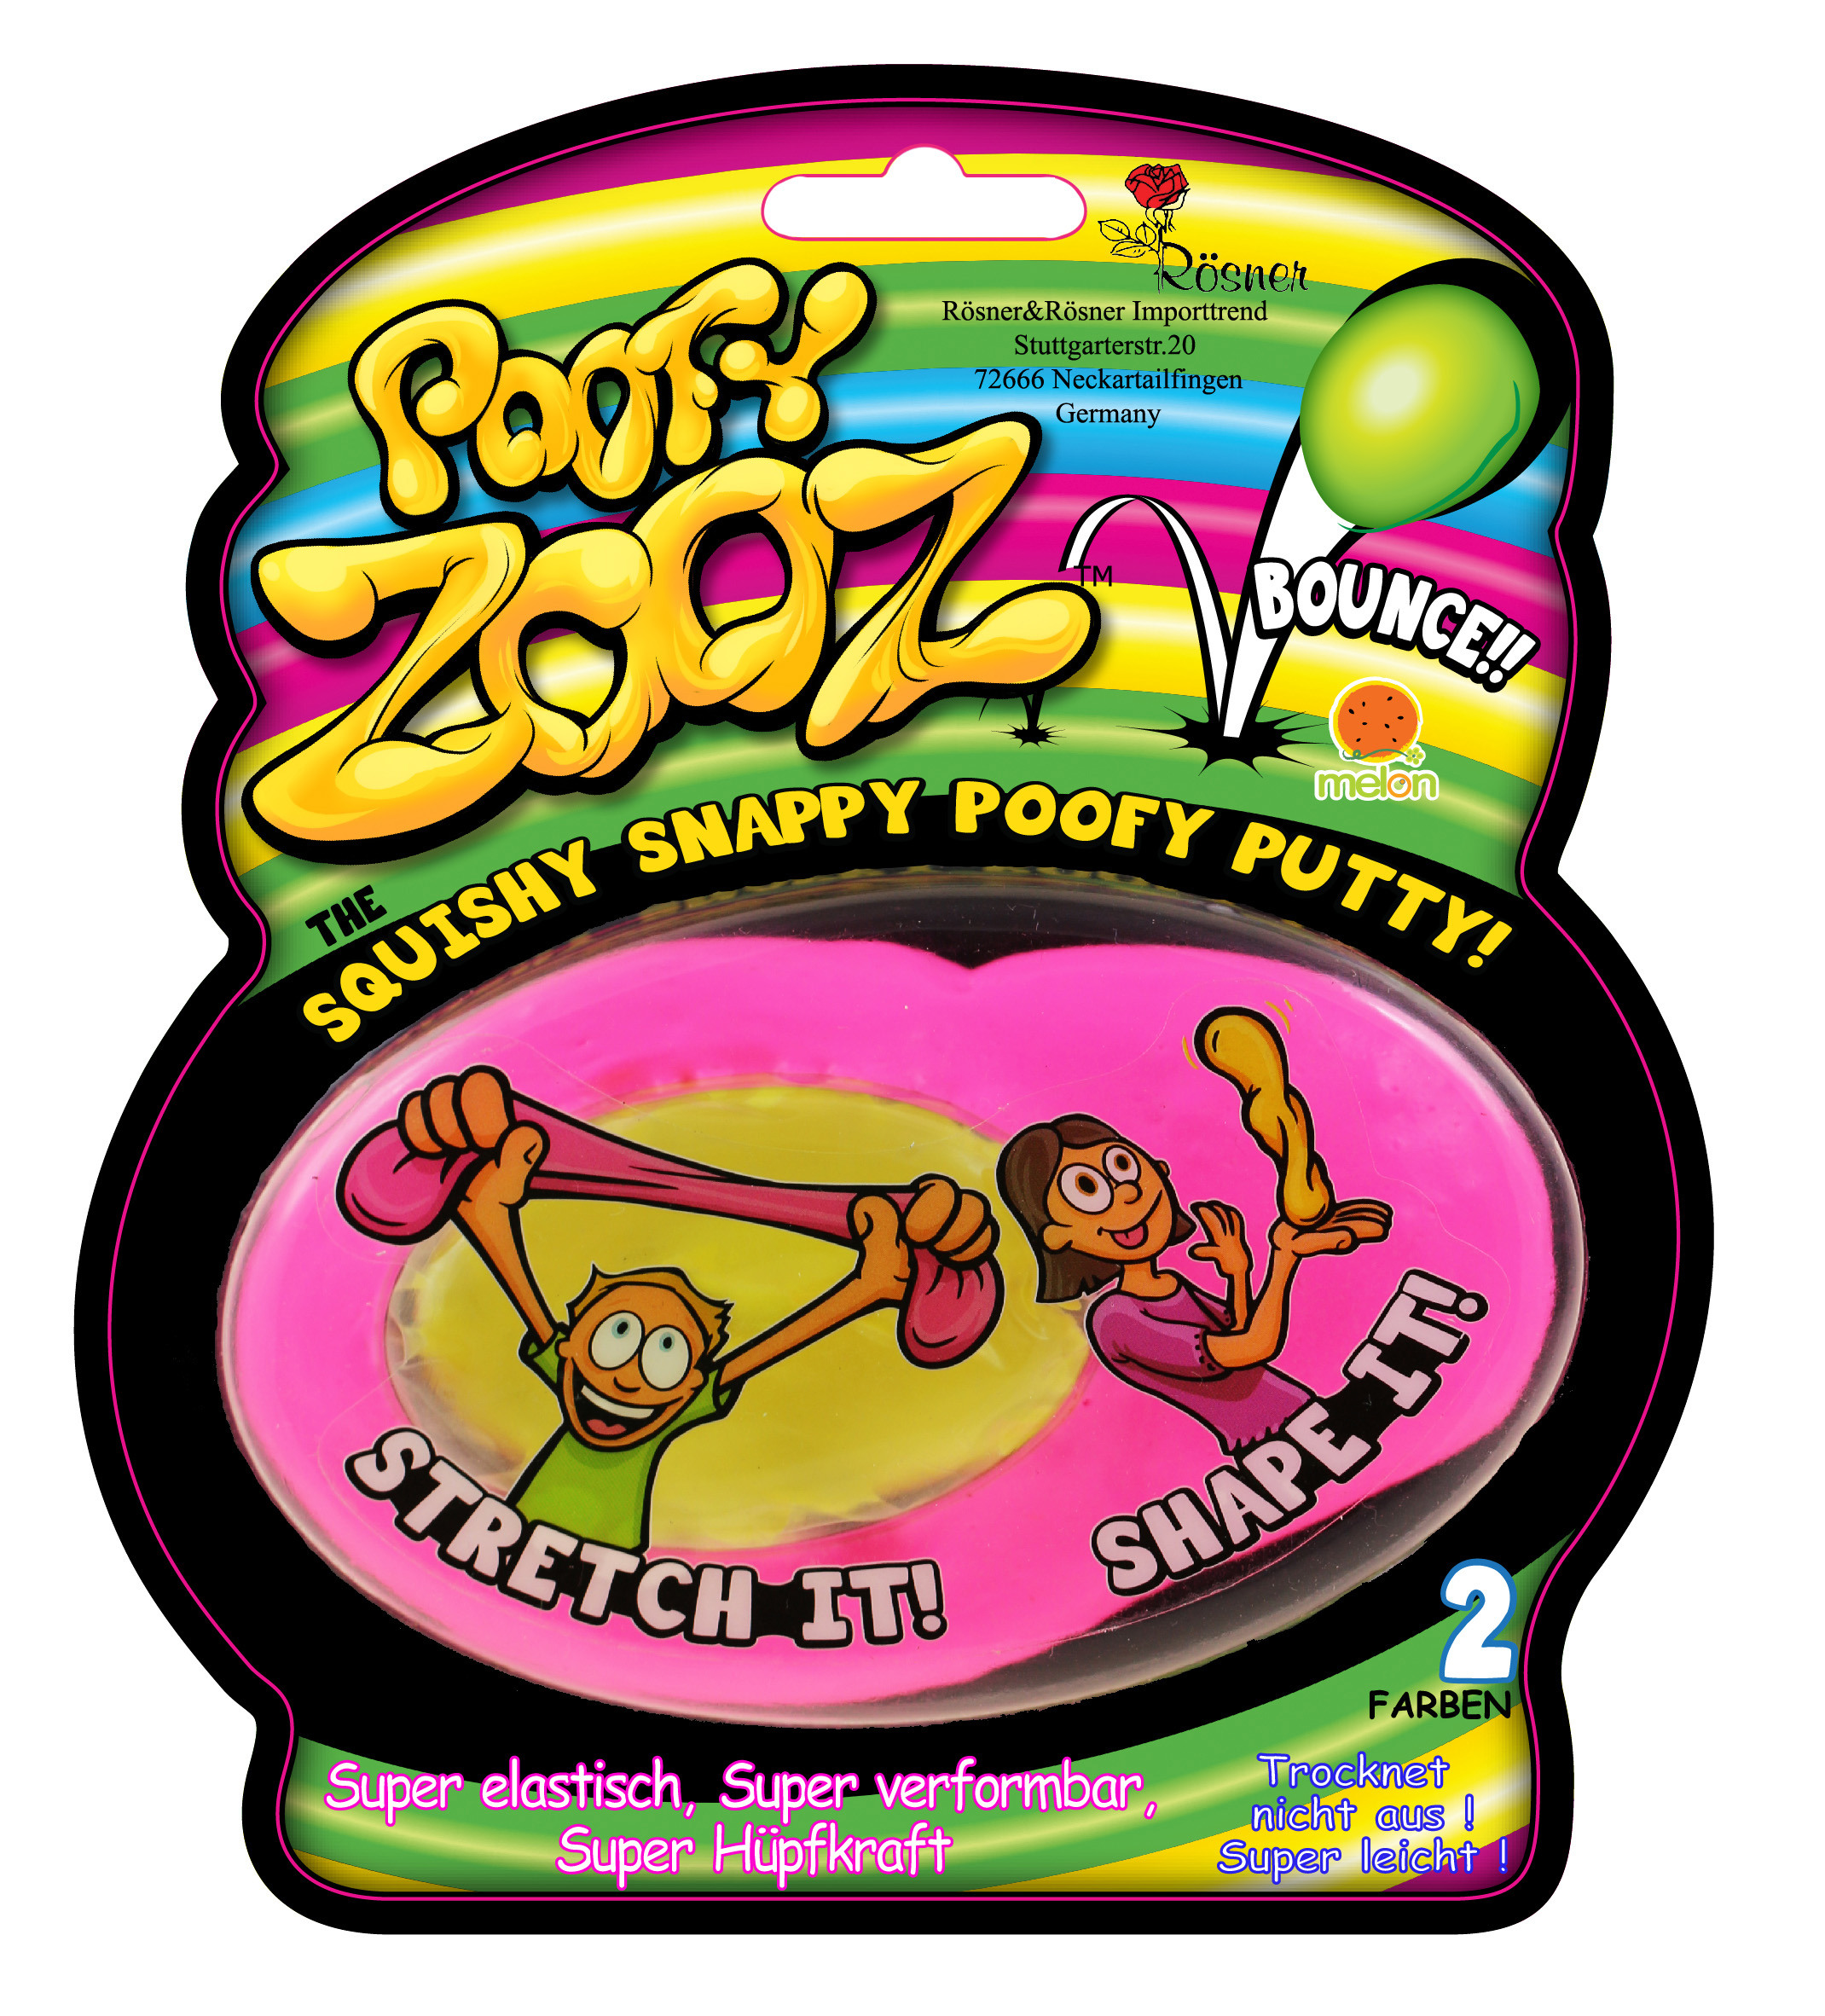 ROOST Poofy Zooz 8008 150x50x180mm ass.